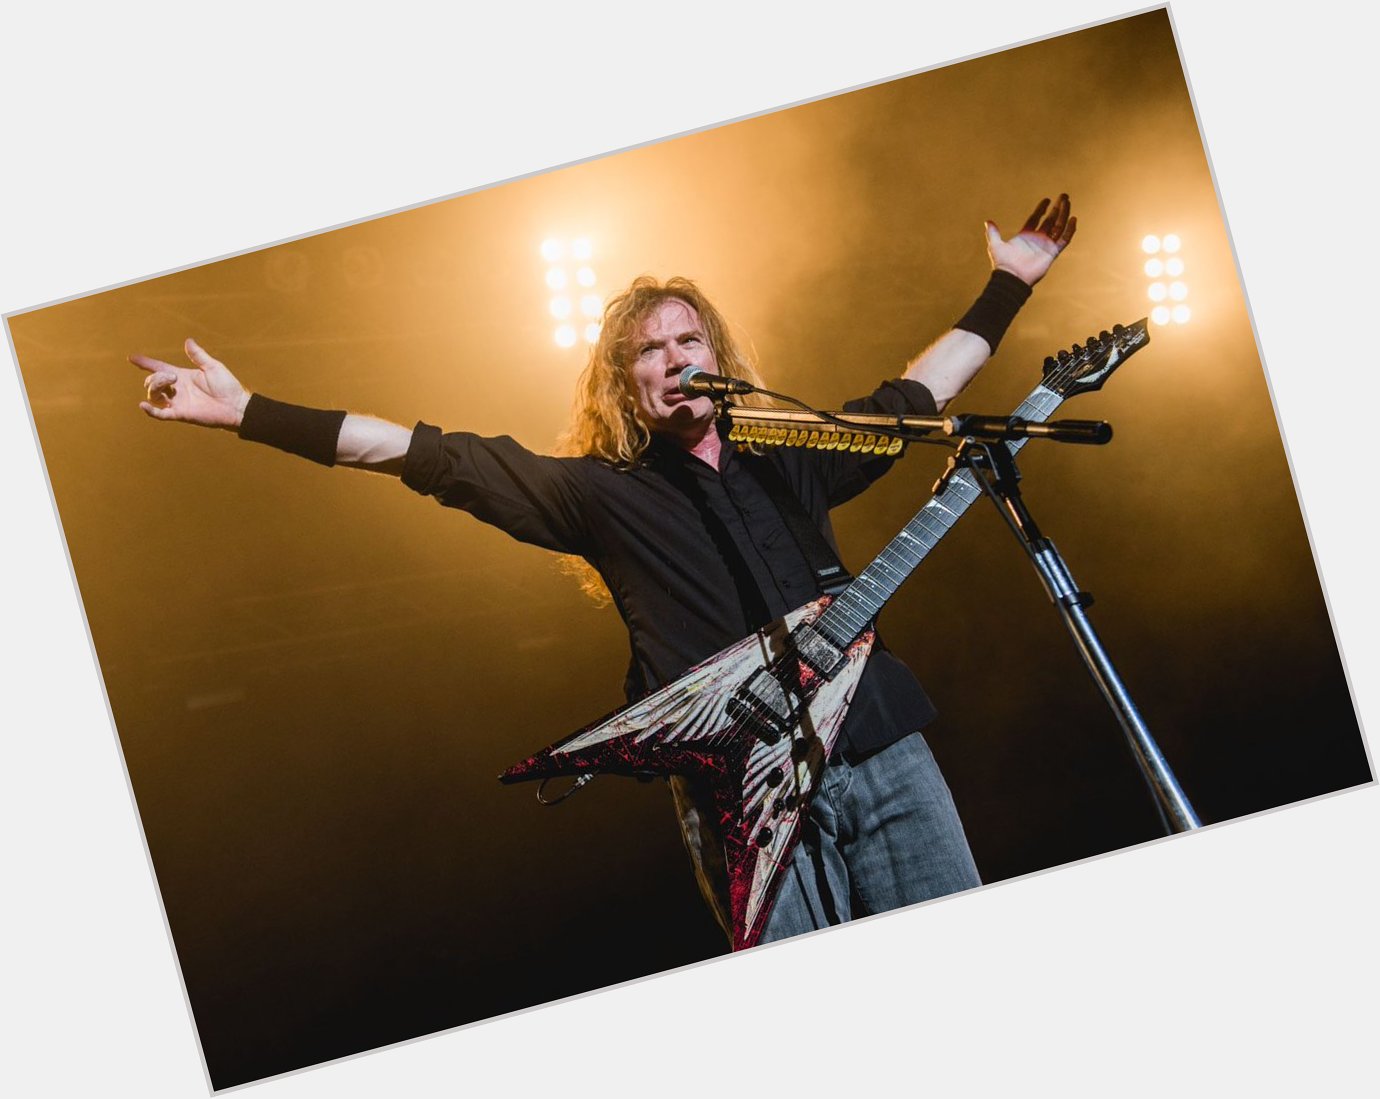 Happy Birthday To The King Of Thrash Metal .. Dave Mustaine \\m/ Megadeth . Long Live.   